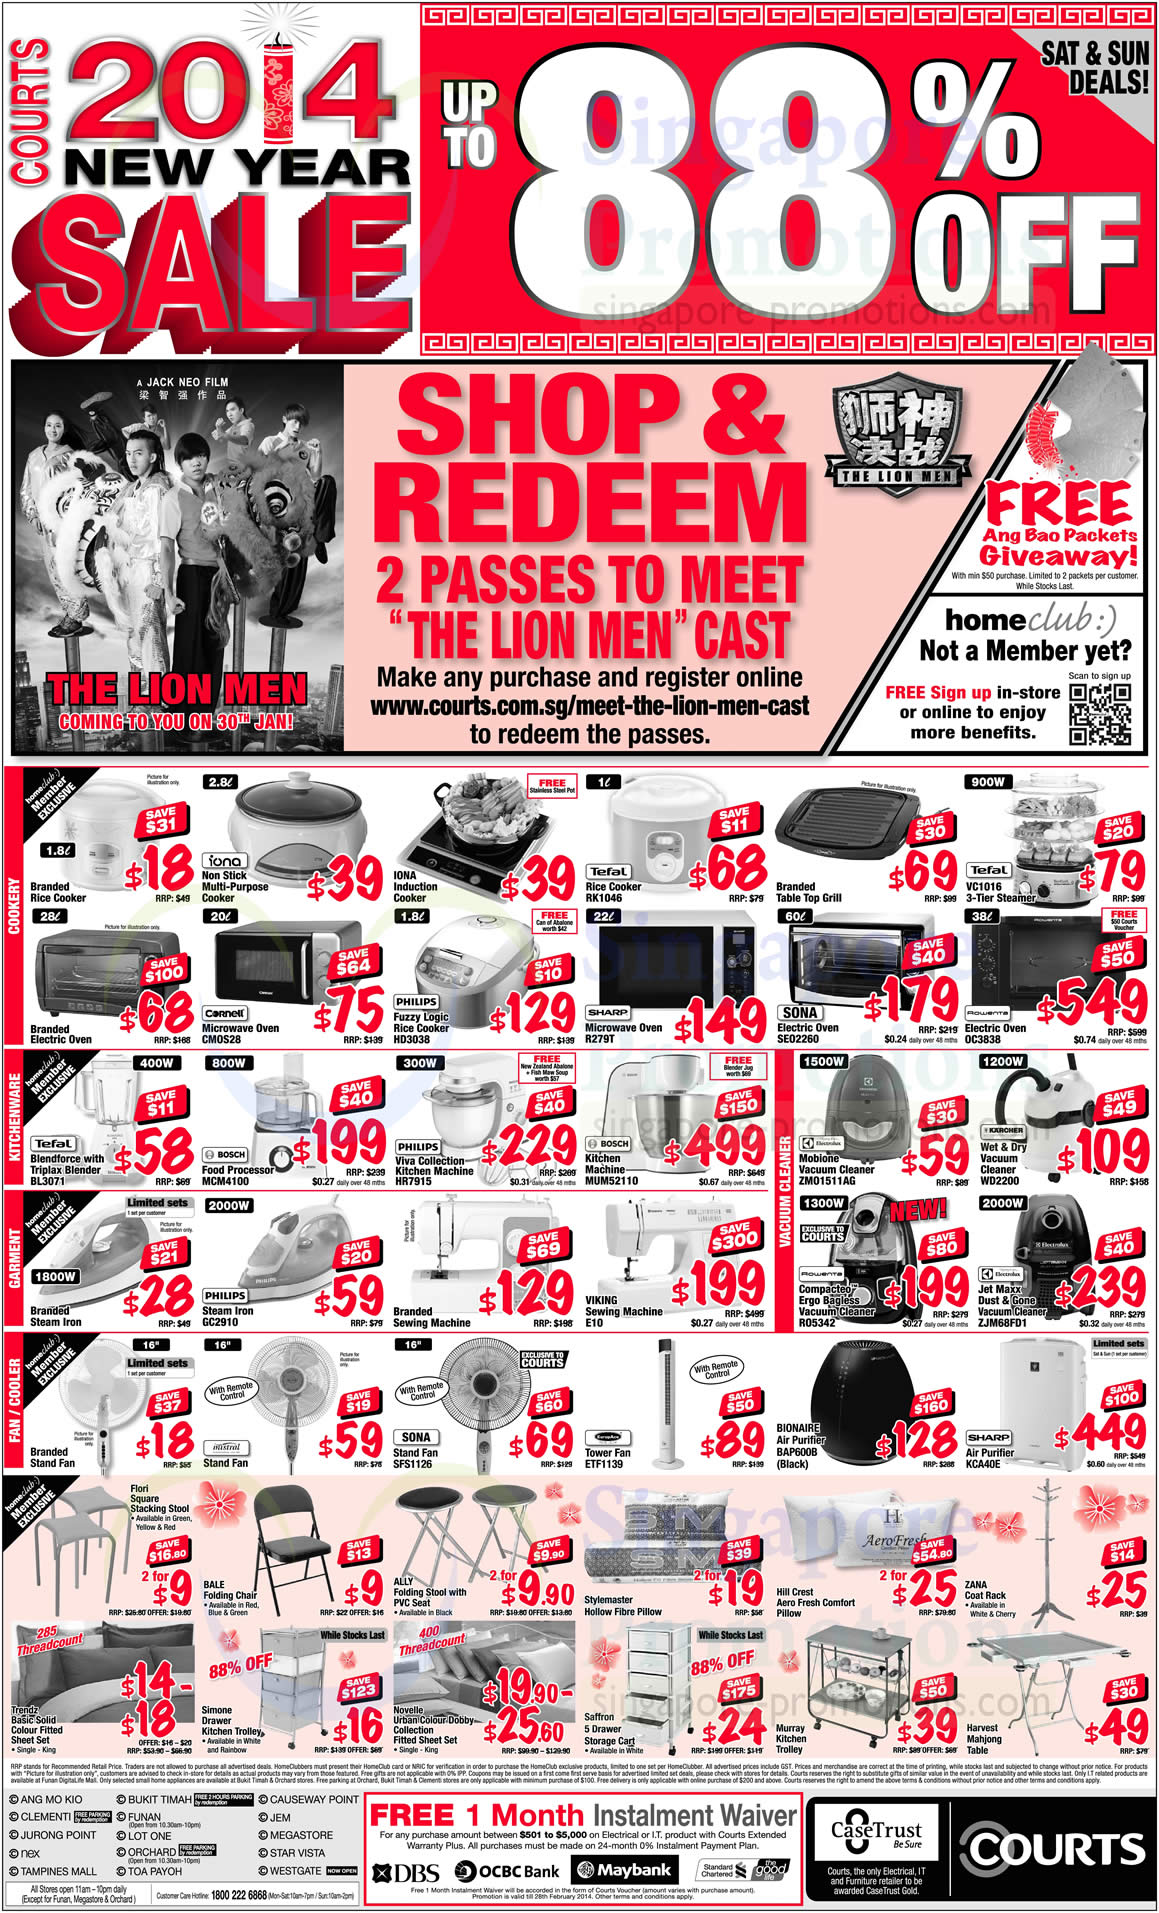 Featured image for Courts 2014 New Year SALE Offers 4 - 5 Jan 2014